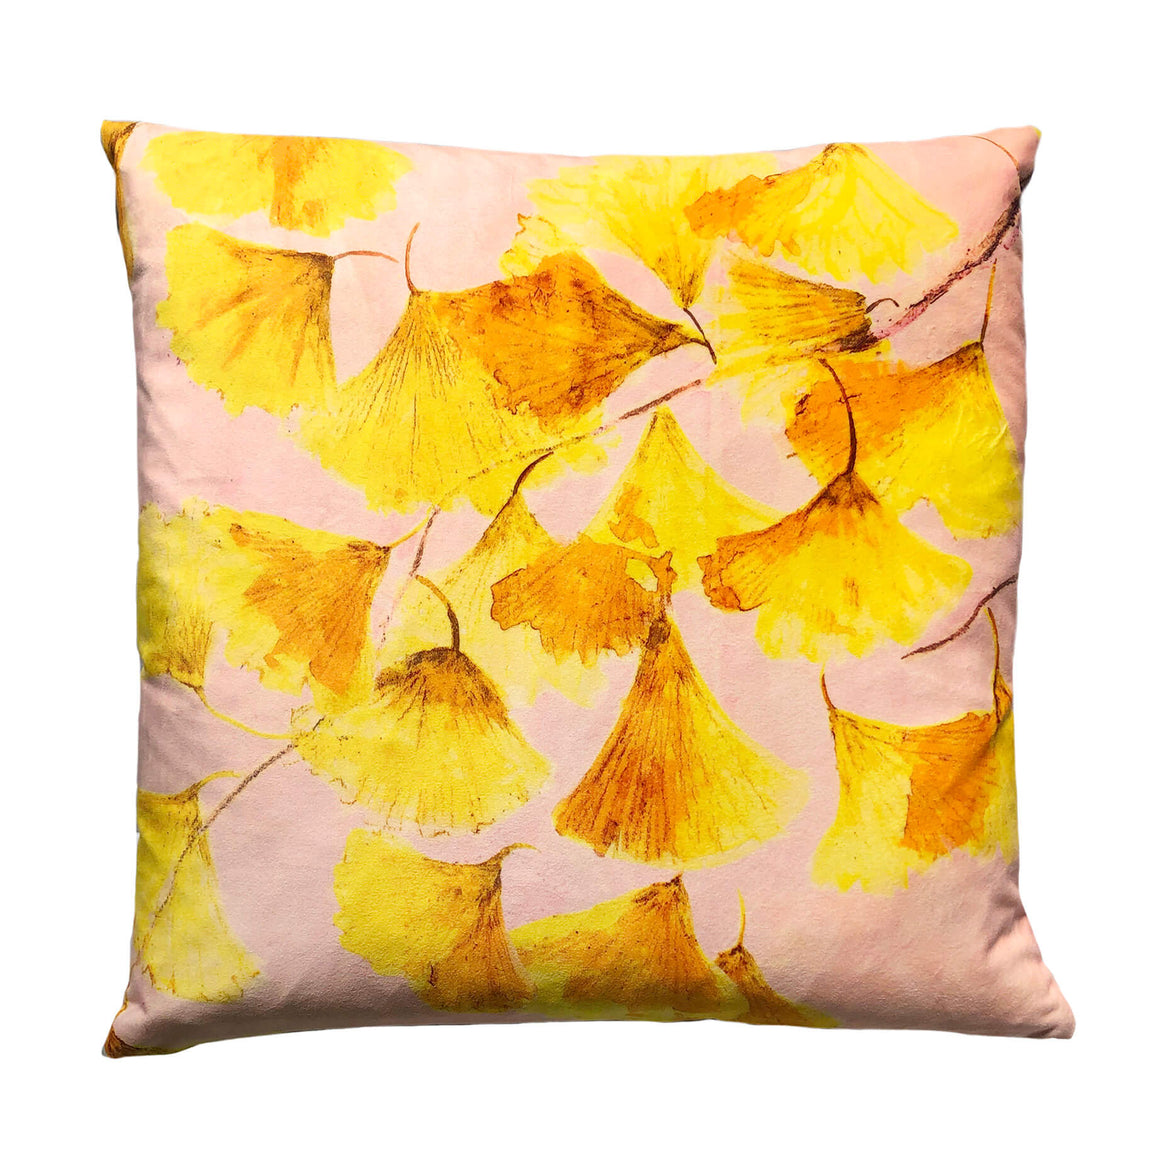 Yellow velvet cushion - Ginkgo in Sunshine - by Anna Jacobs